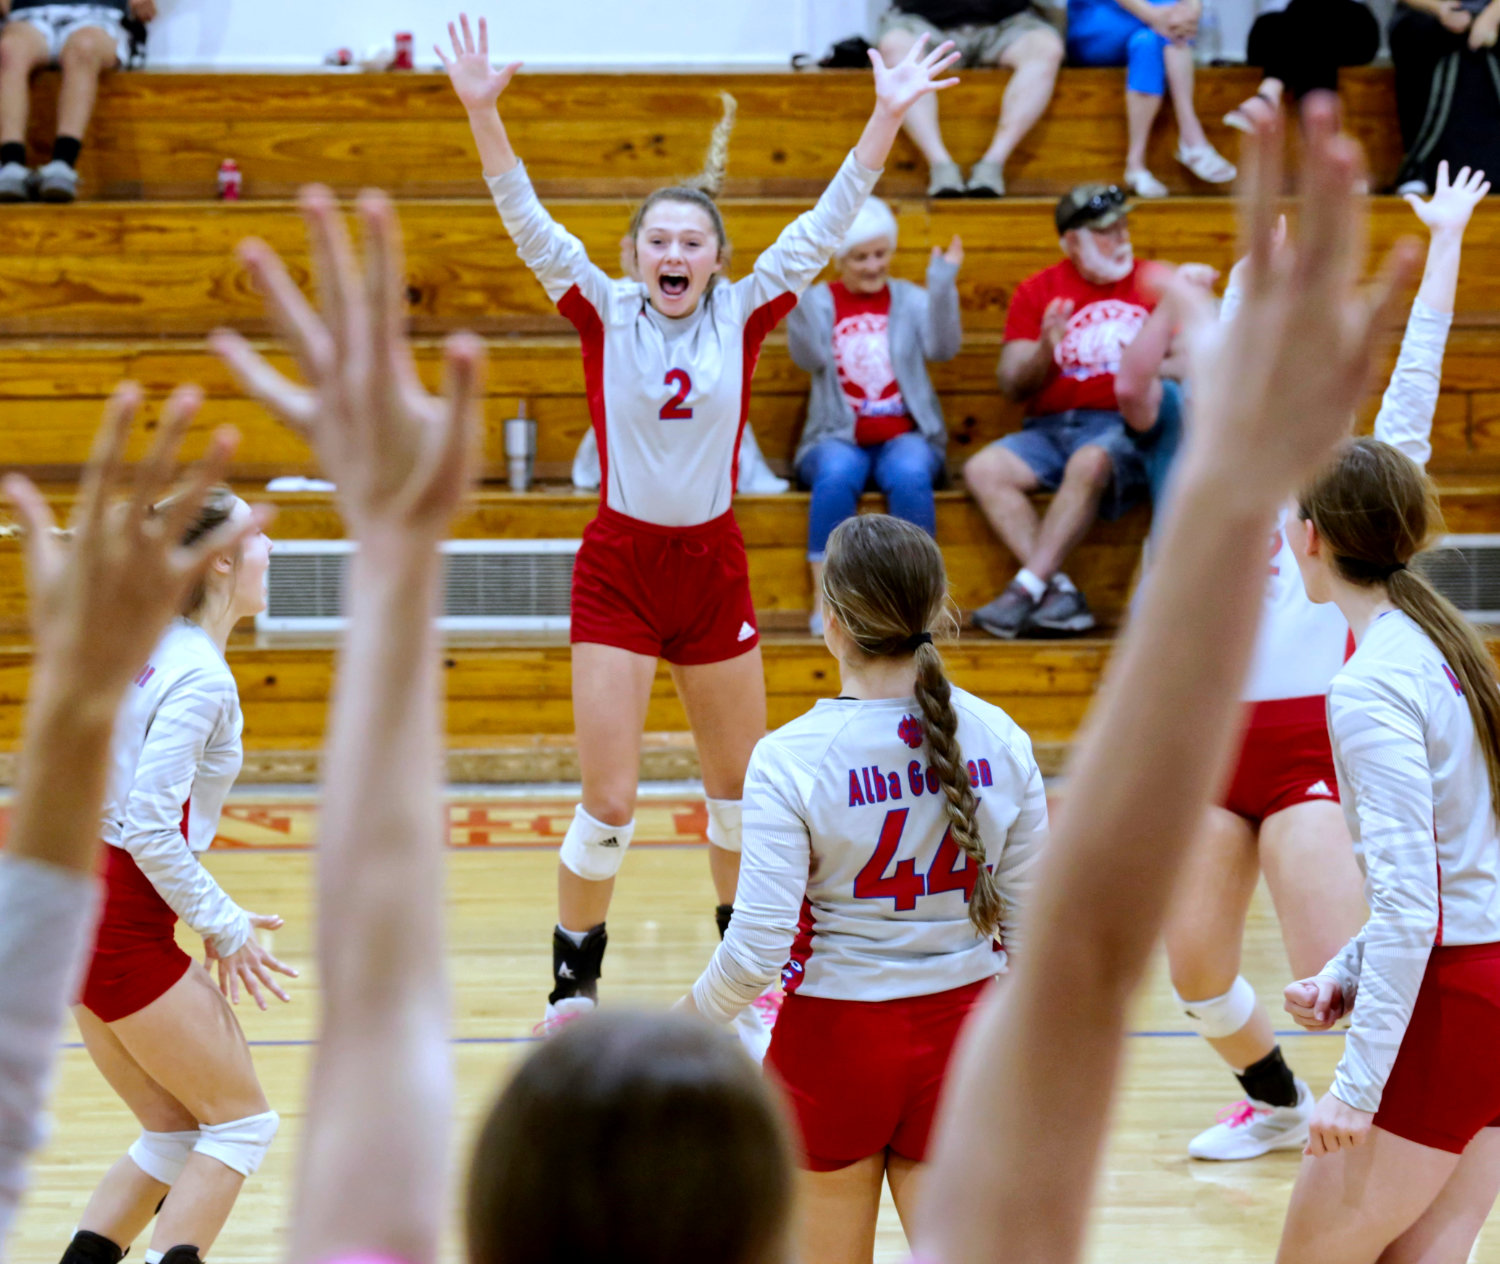 Victory is sweet – the Lady Panthers react to the match-winning point against Boles.